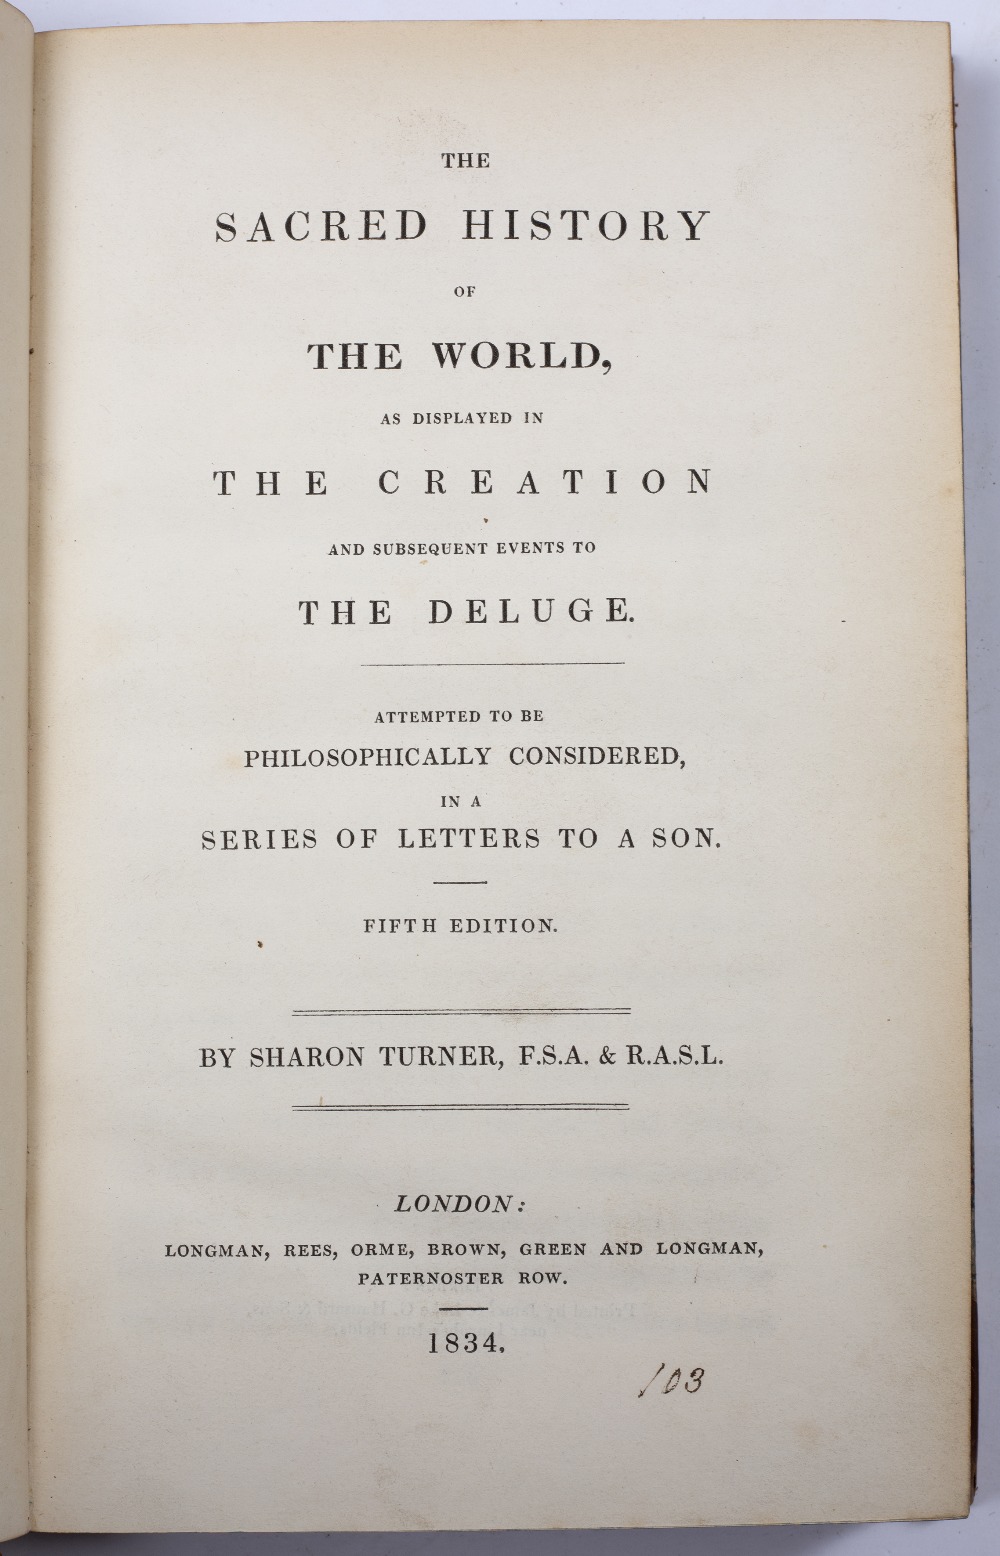 TURNER, Sharon (1768-1847), English Historian The Sacred History of the World as displayed in the - Image 2 of 2